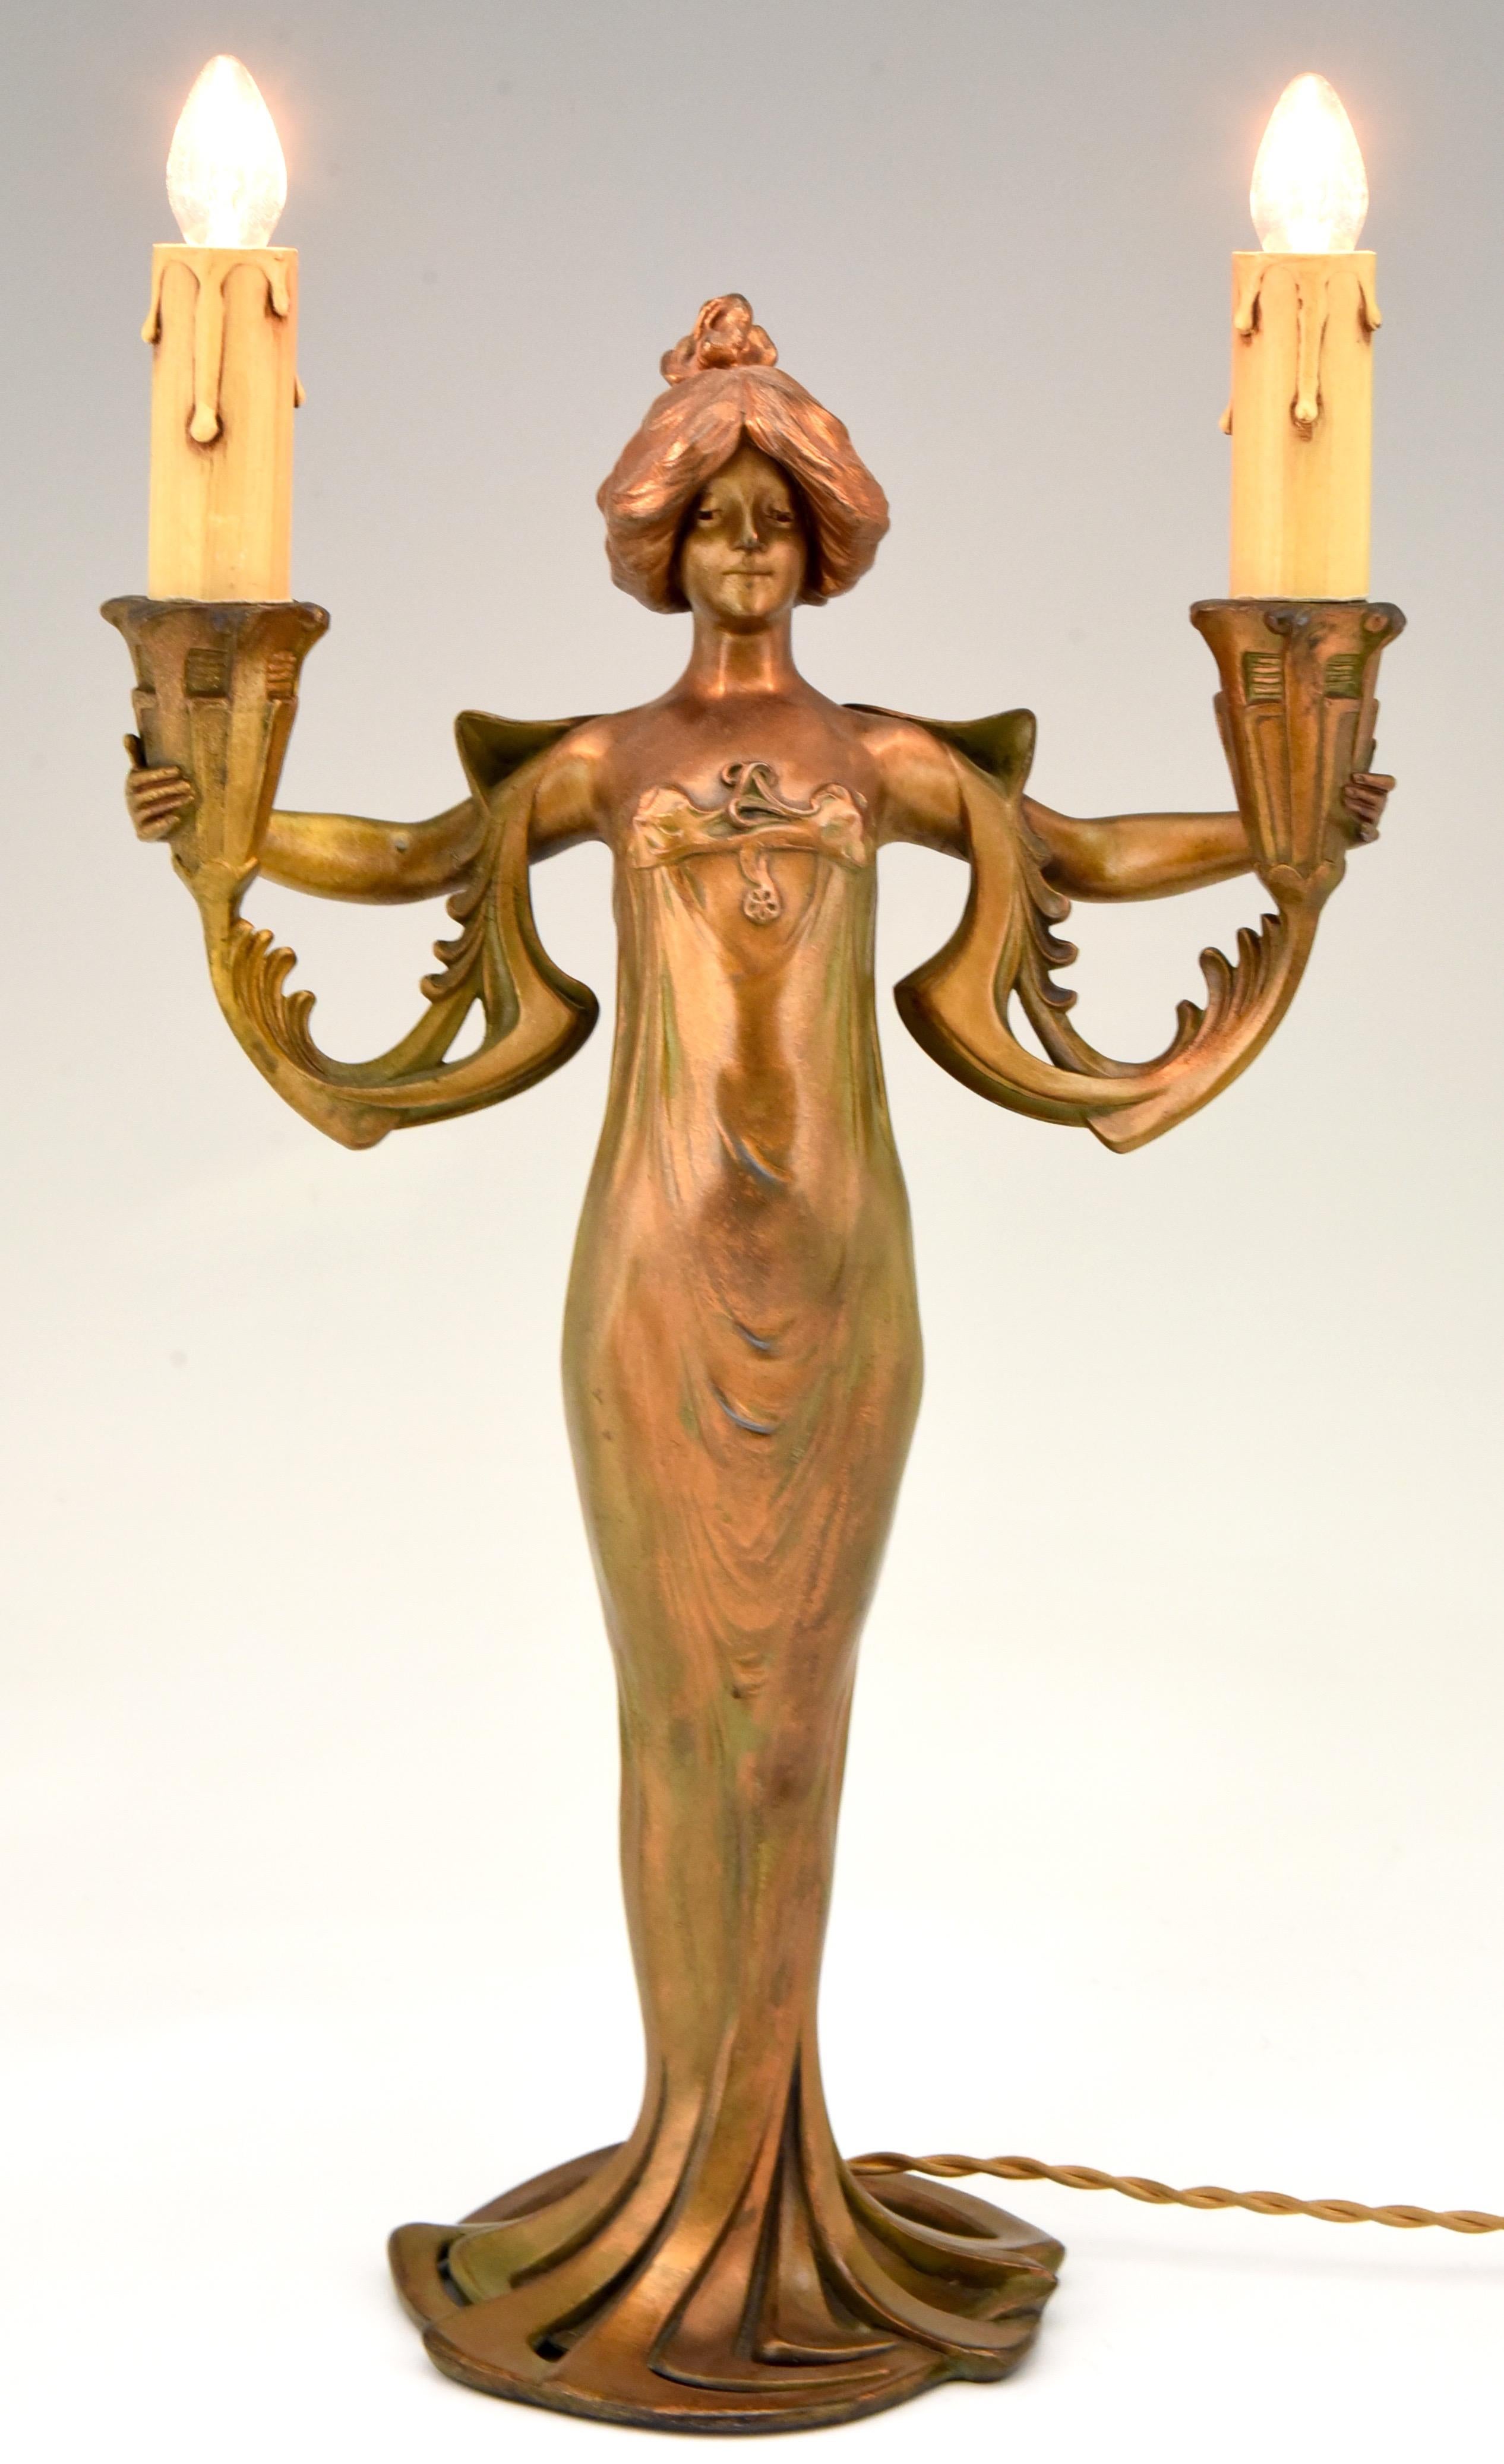 Art Nouveau figural lamp lady in long dress holding two candles by Lucien Alliot.
Patinated Art metal.
France, 1900. 

Literature:
“The dictionary of sculptors in bronze” by James Mackay.? Antique collectors club.? “Les bronzes de XIXe siècle”